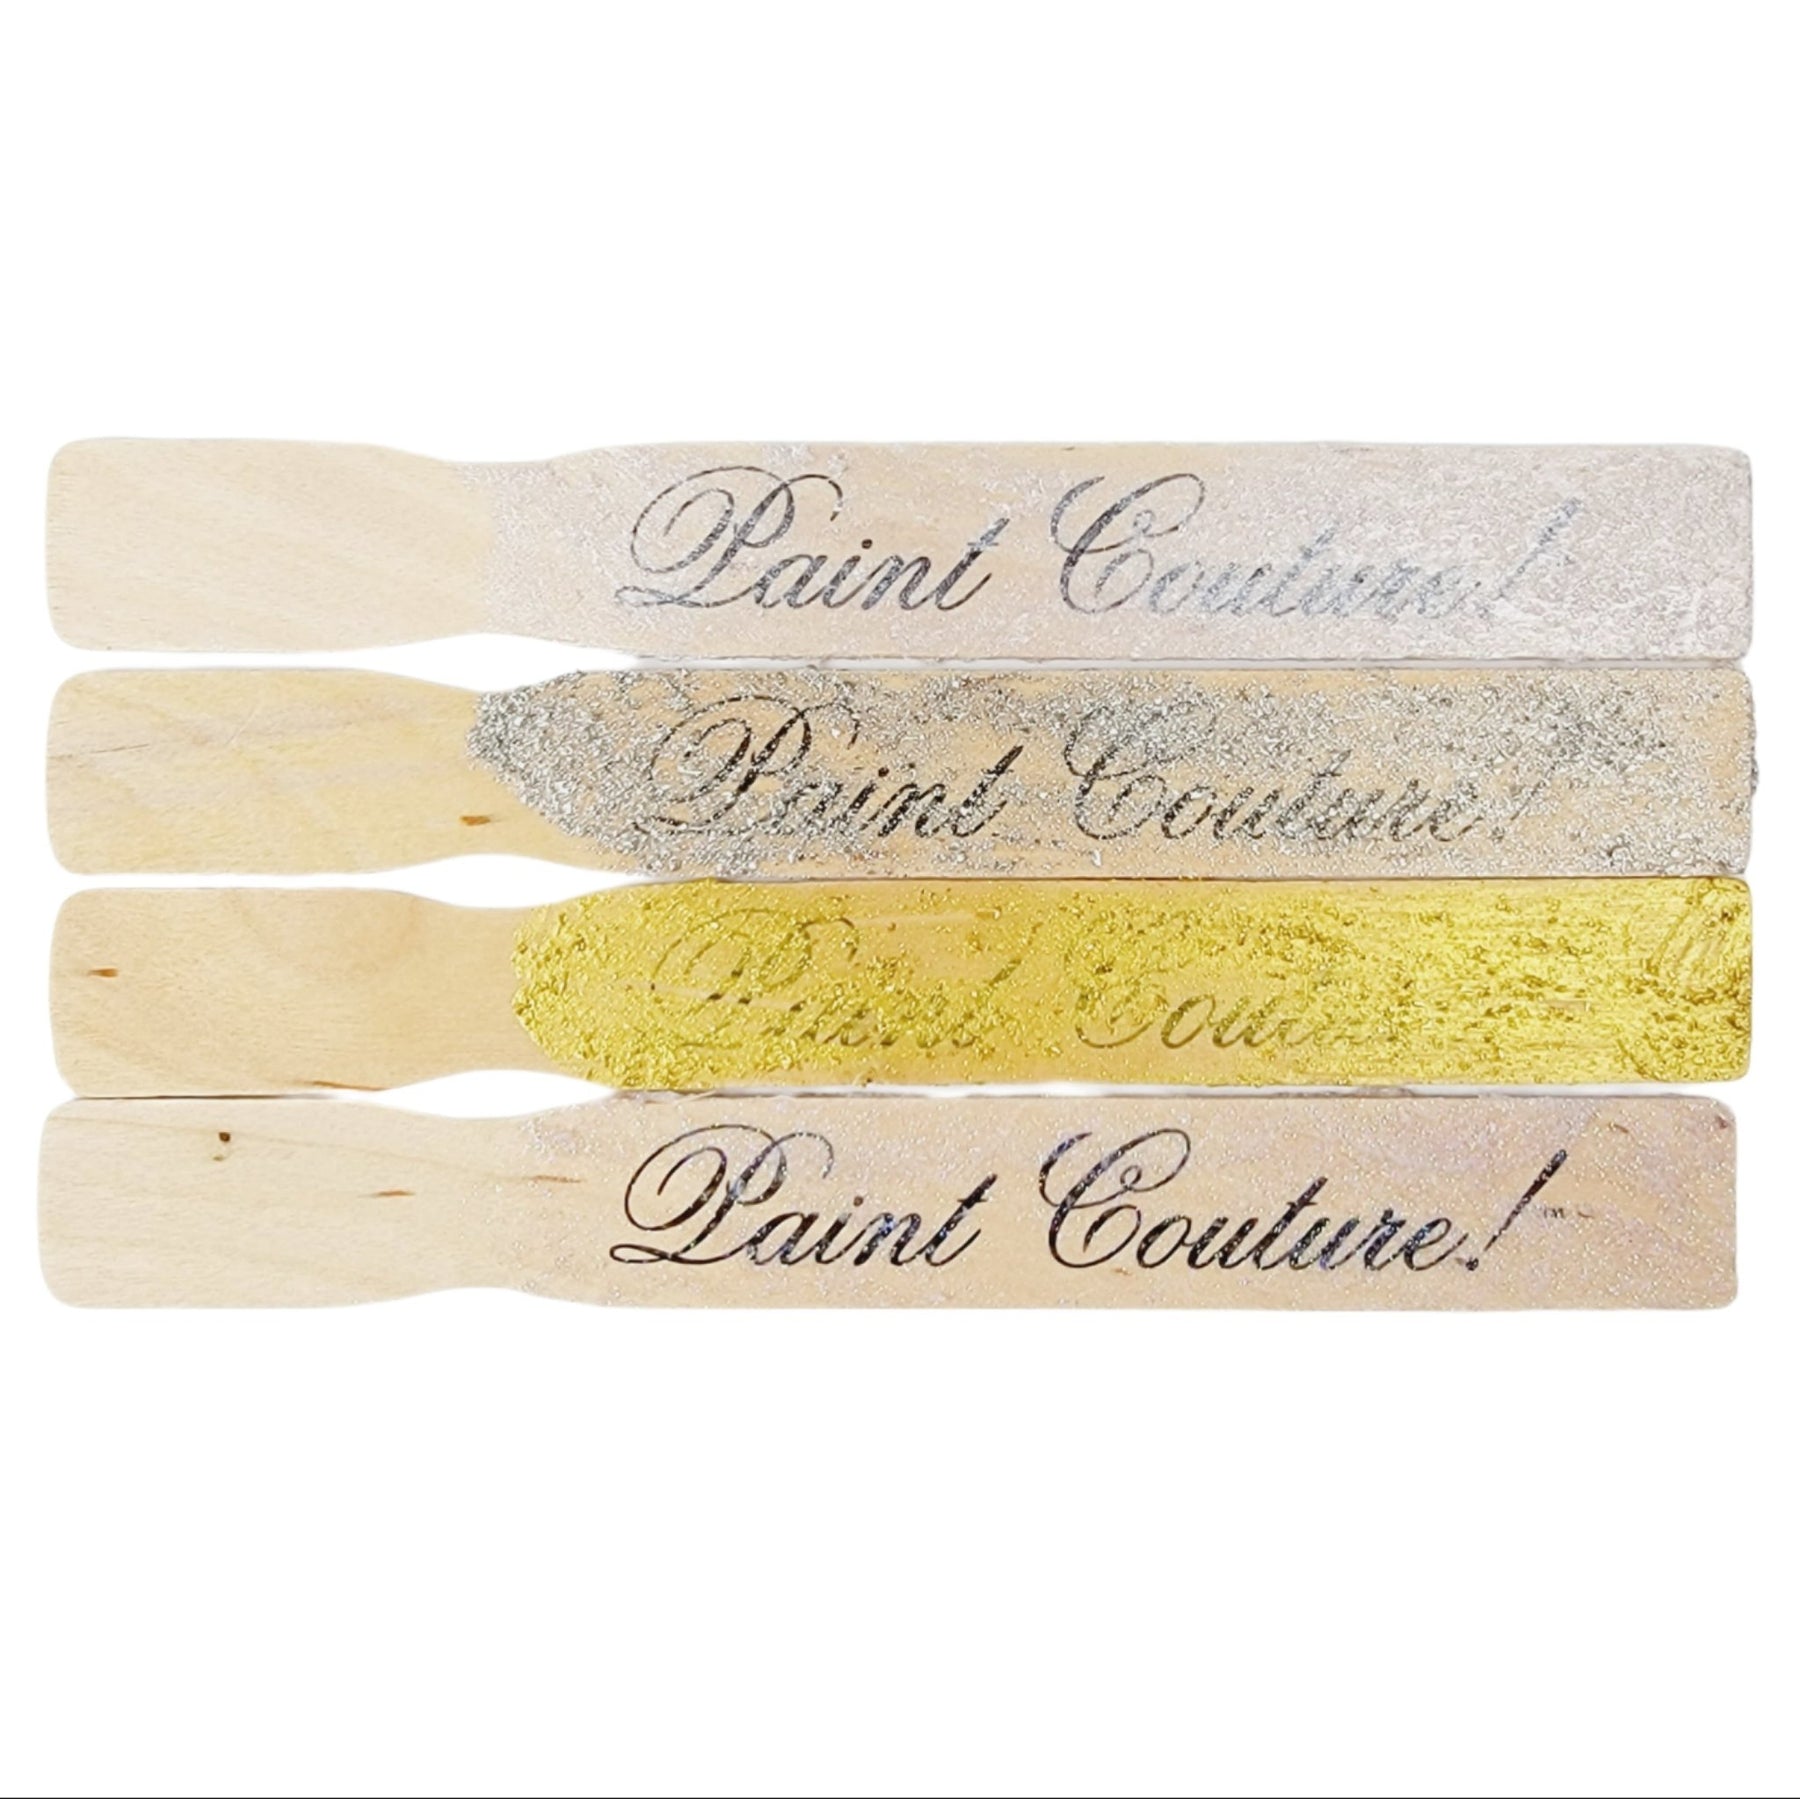 Paint Couture German Glass Glitter – All Paint Products